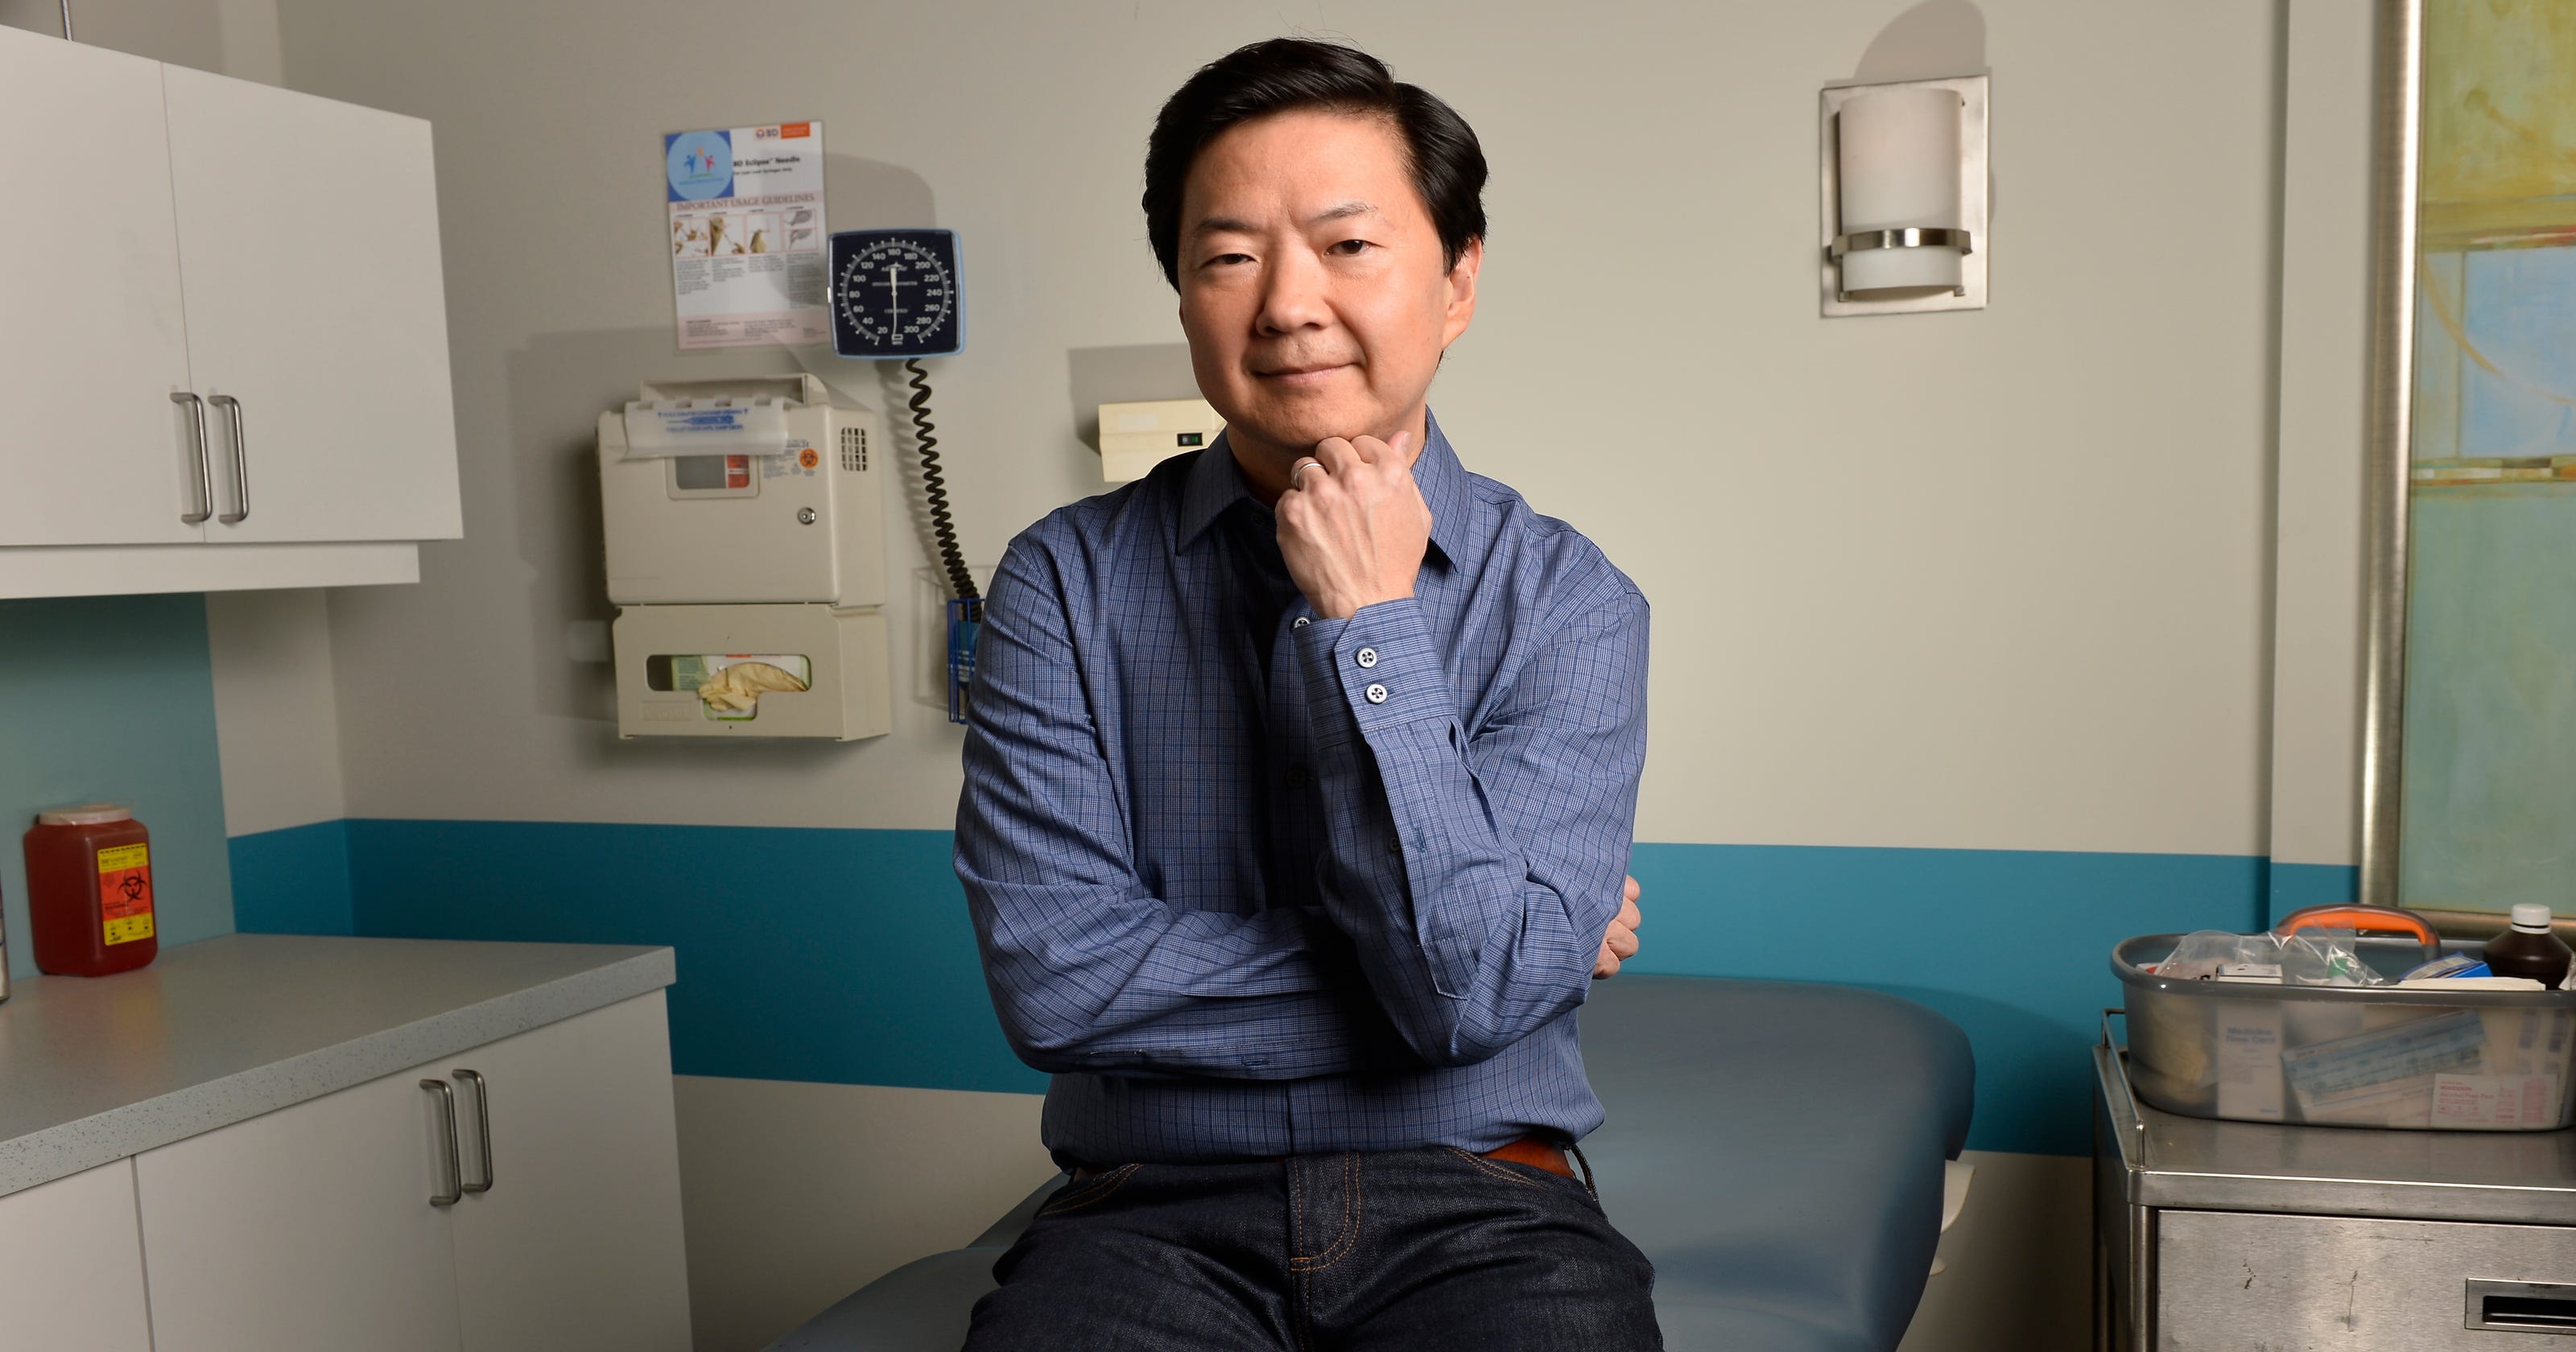 Ken Jeong Stops His Comedy Routine To Give A Woman Medical Assistance